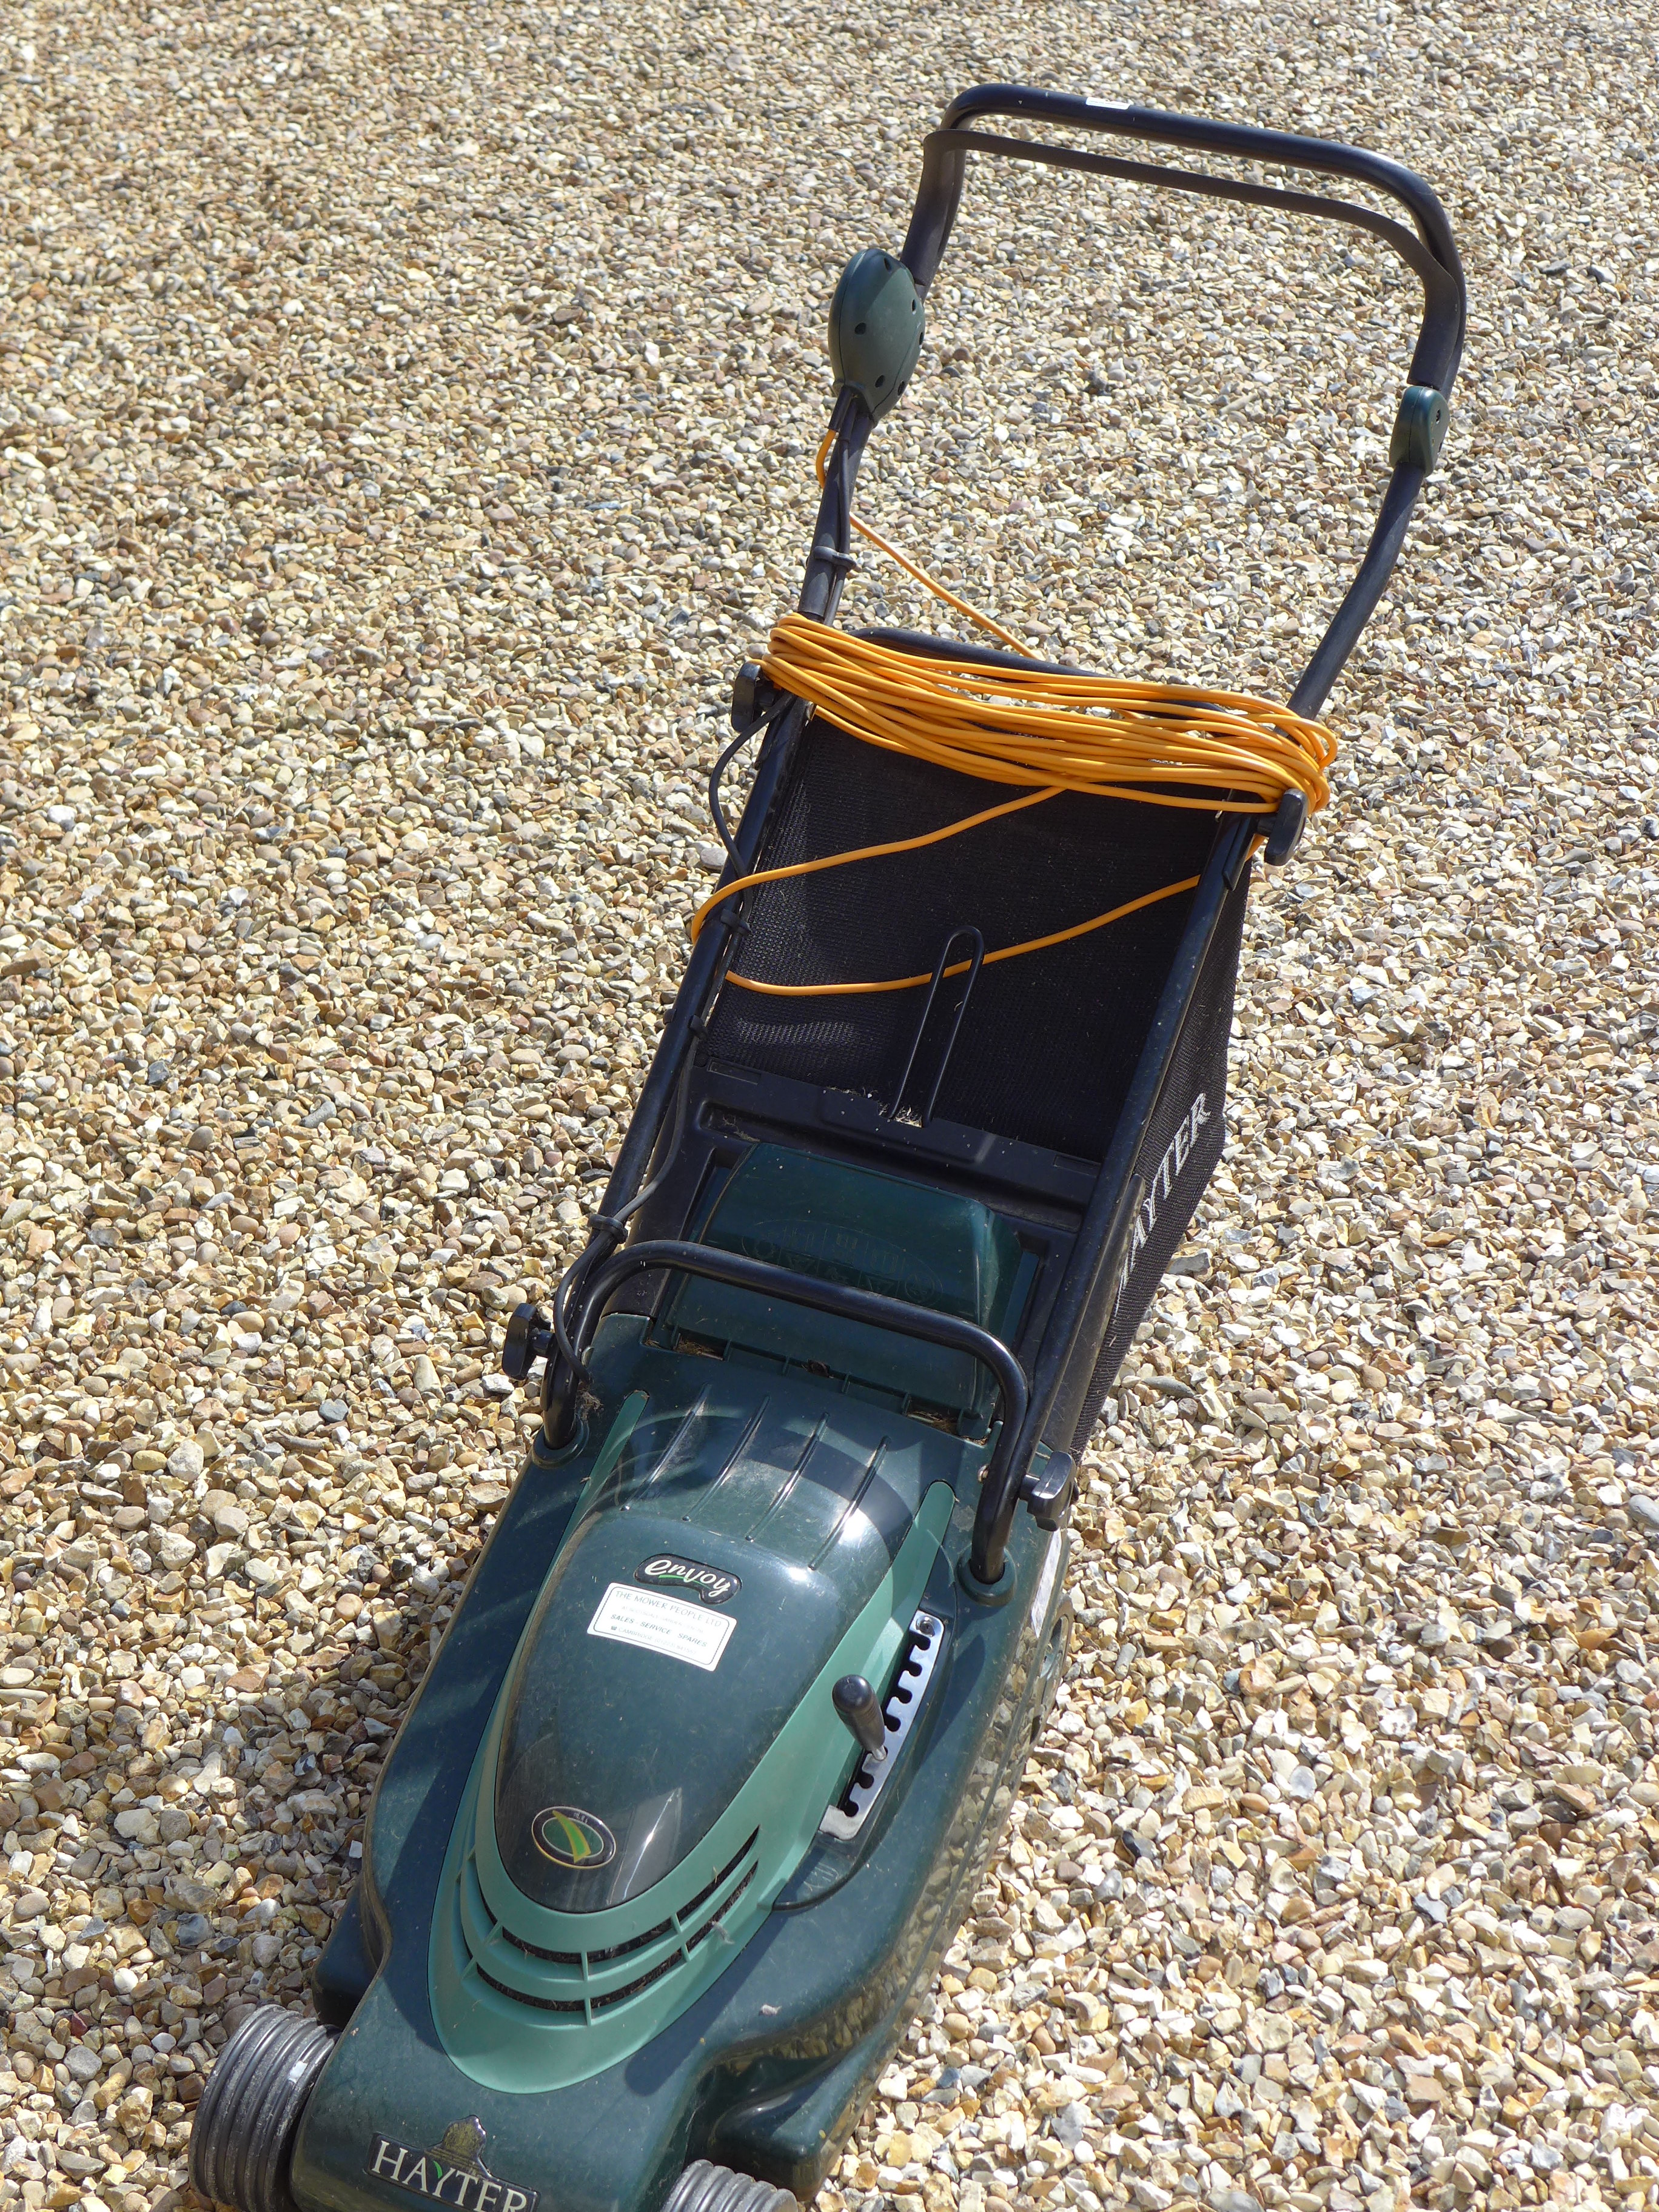 A Hayter Envoy lawn mower 
Condition report: In working order